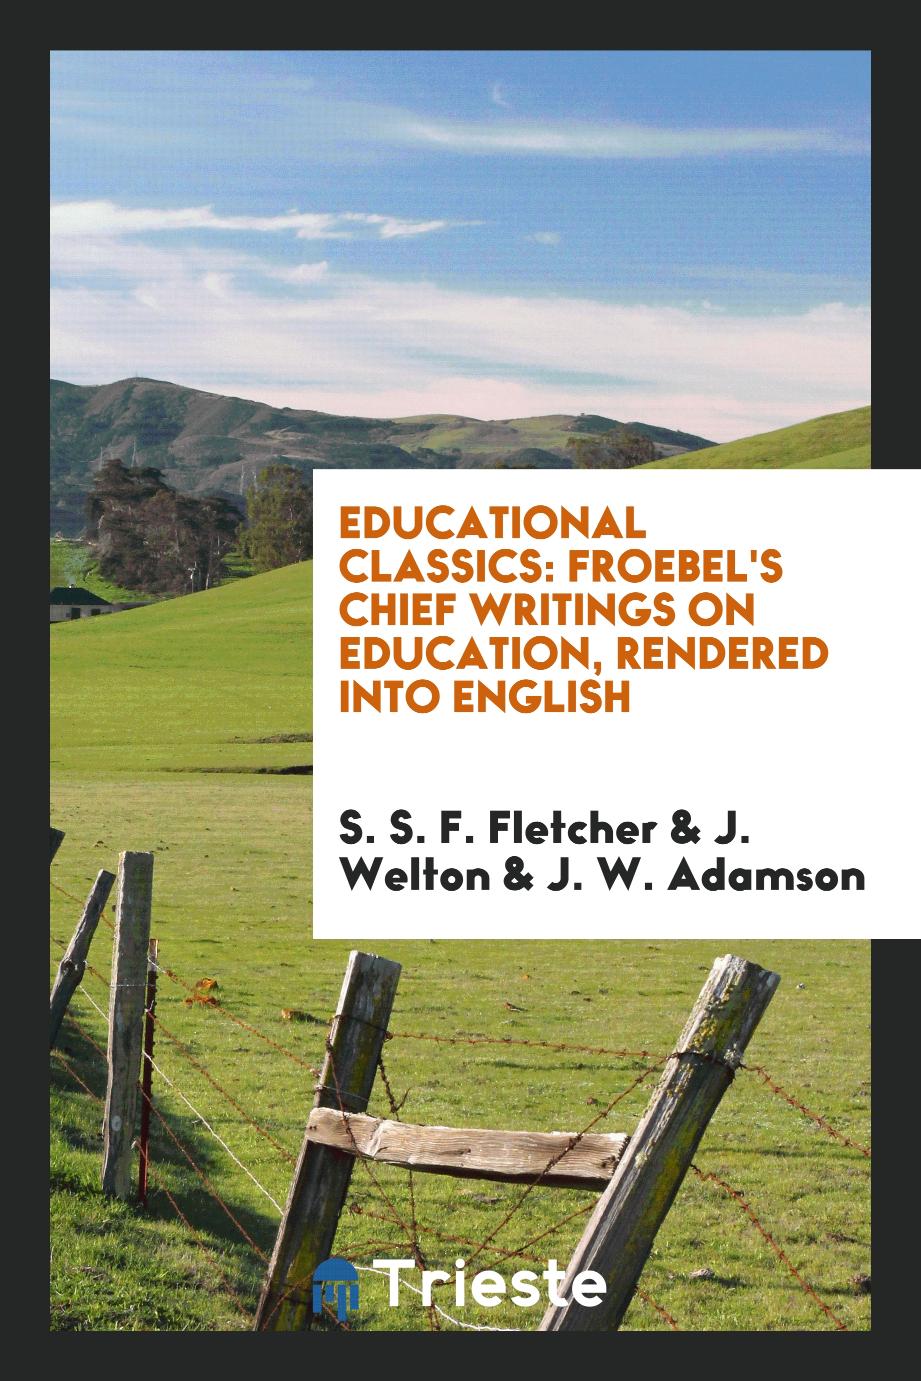 Educational Classics: Froebel's Chief Writings on Education, Rendered into English